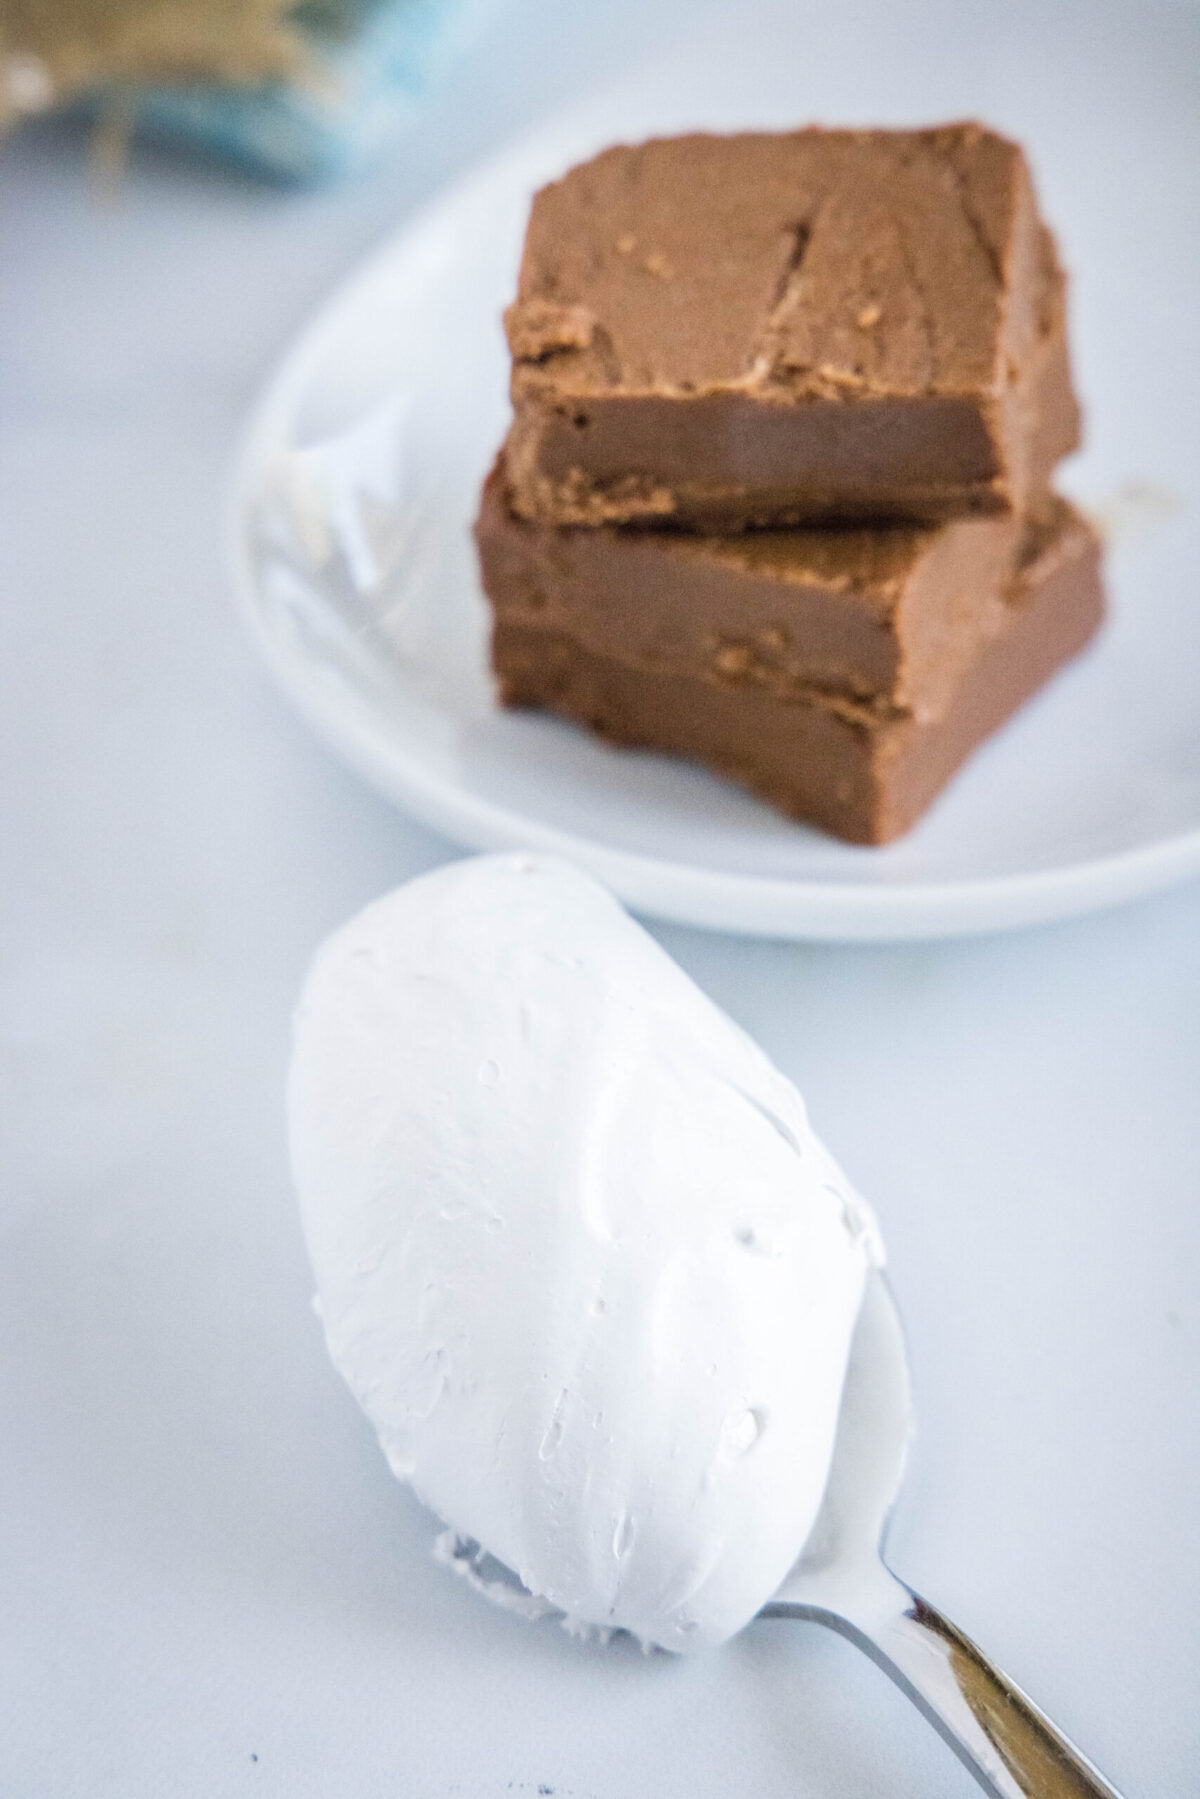 A spoonful of marshmallow fluff next to a plate with two pieces of fudge